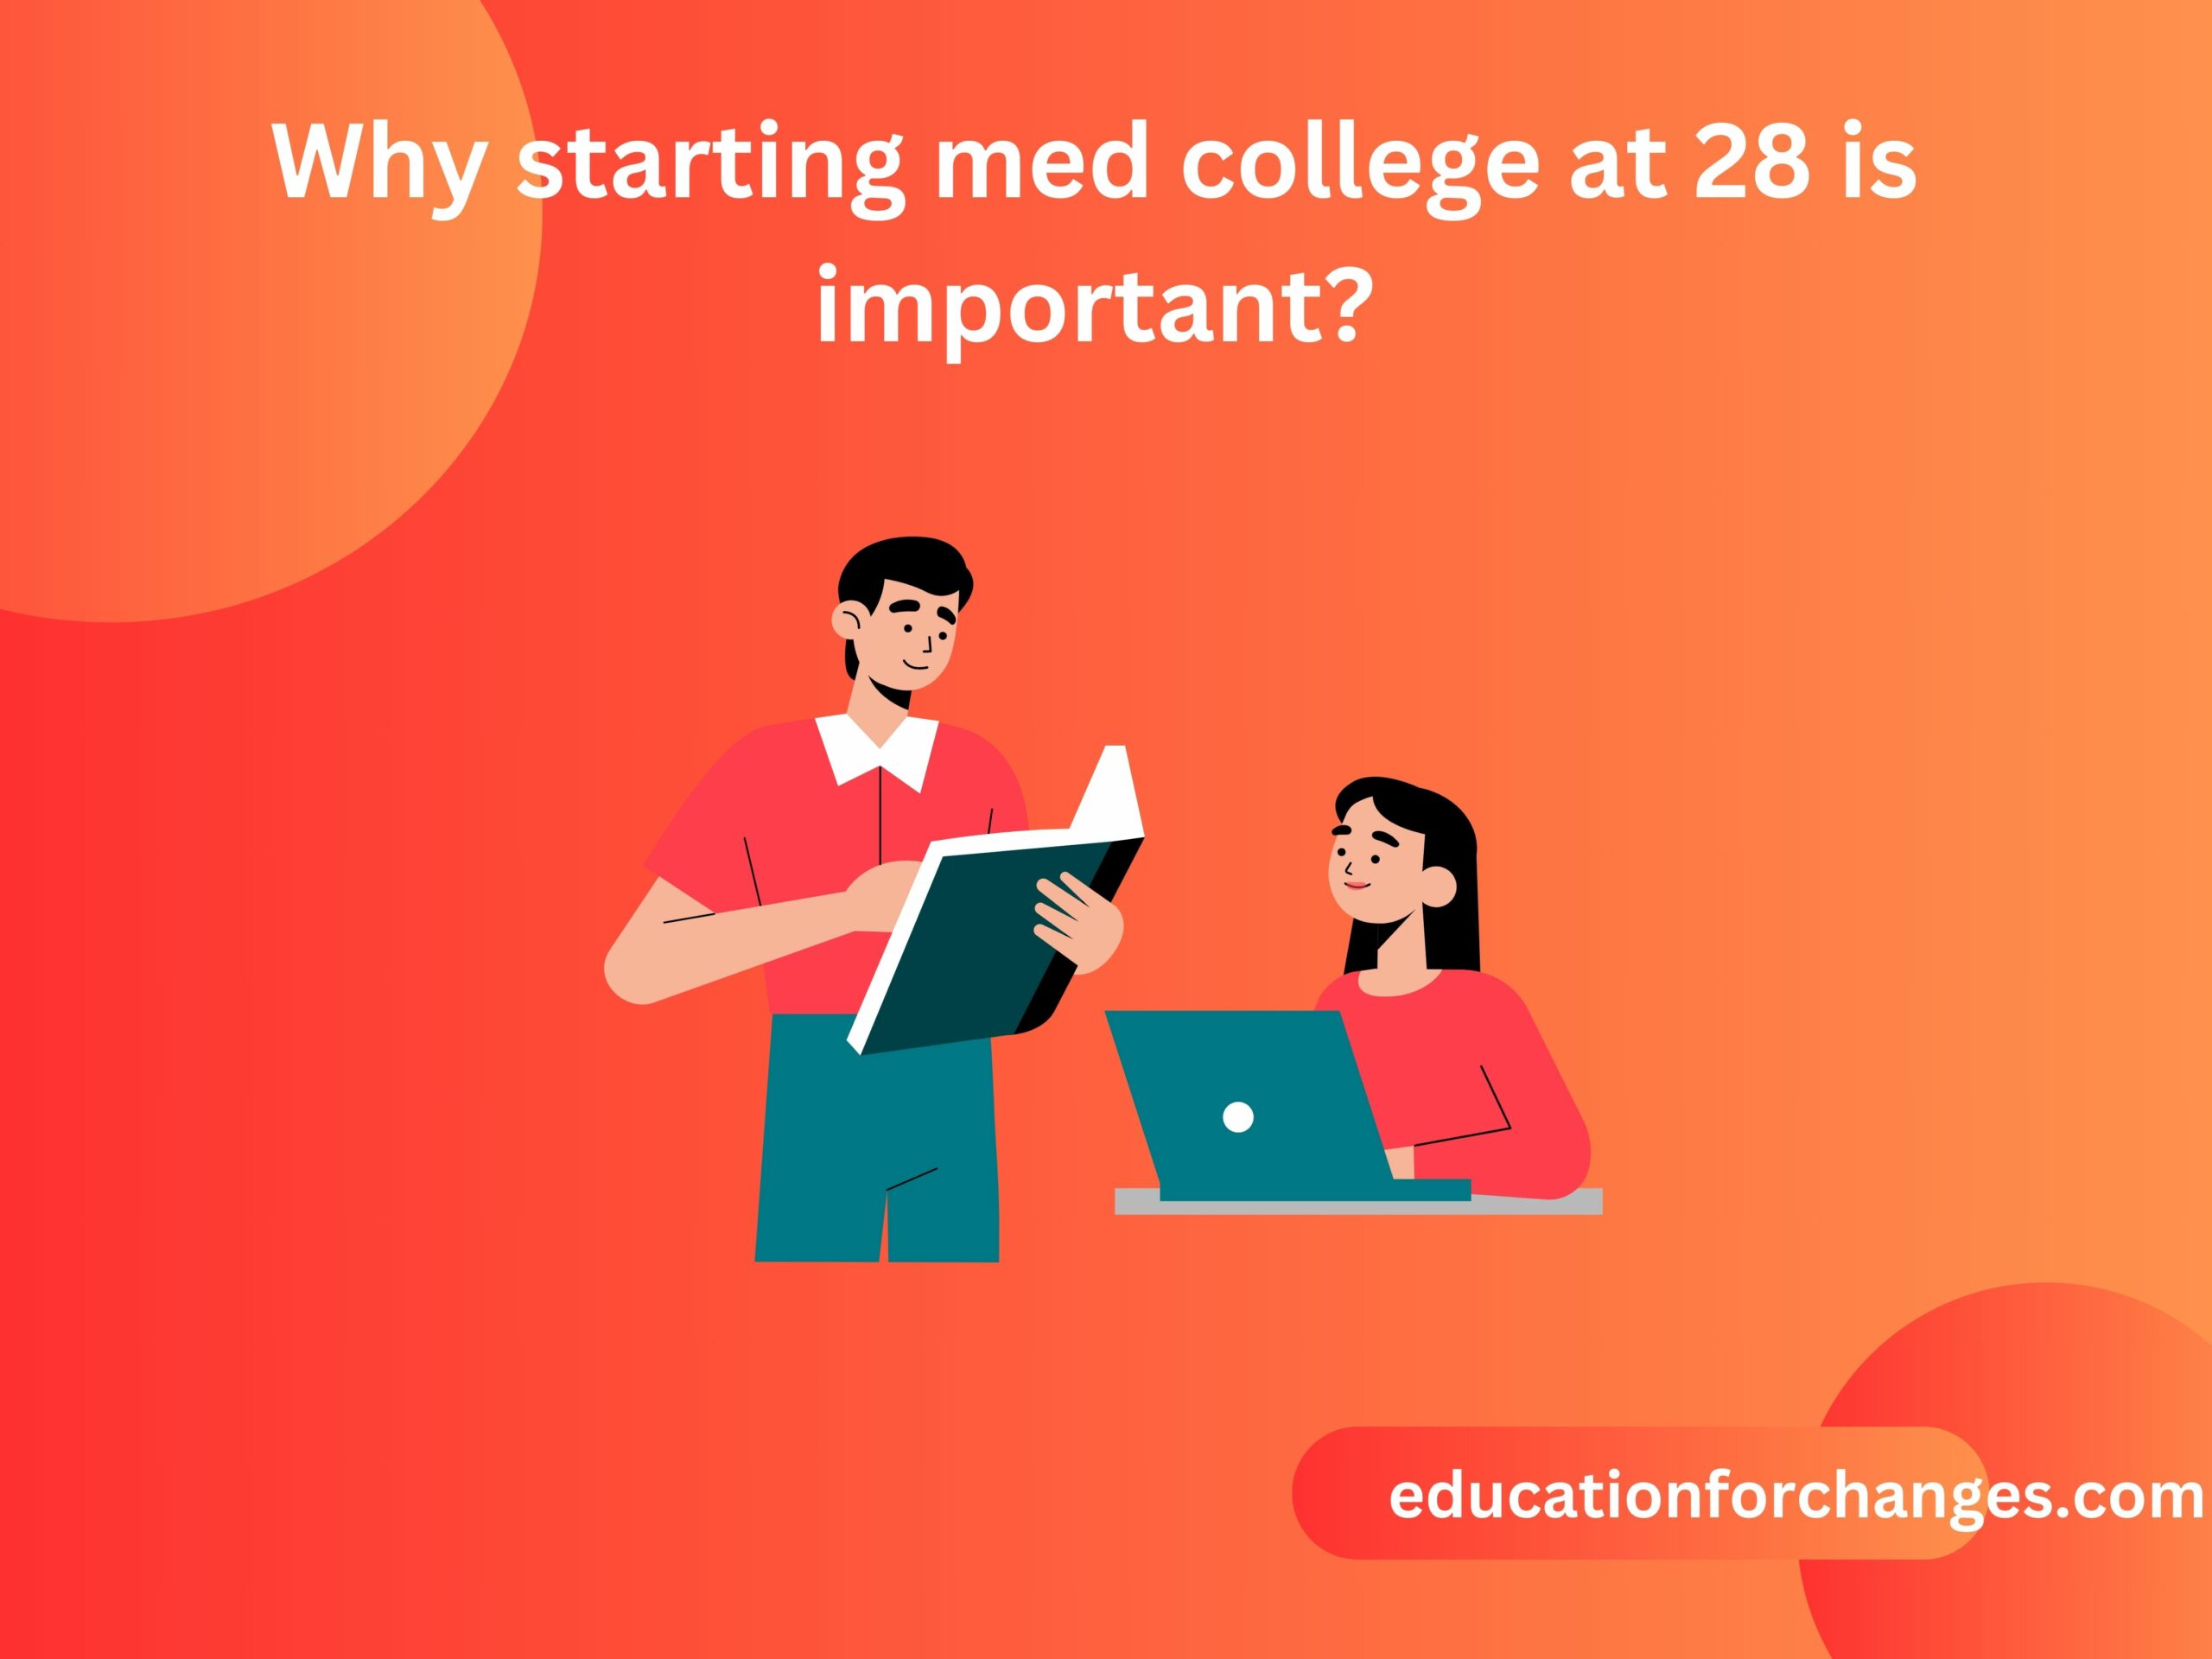 Why starting med college at 28 is important